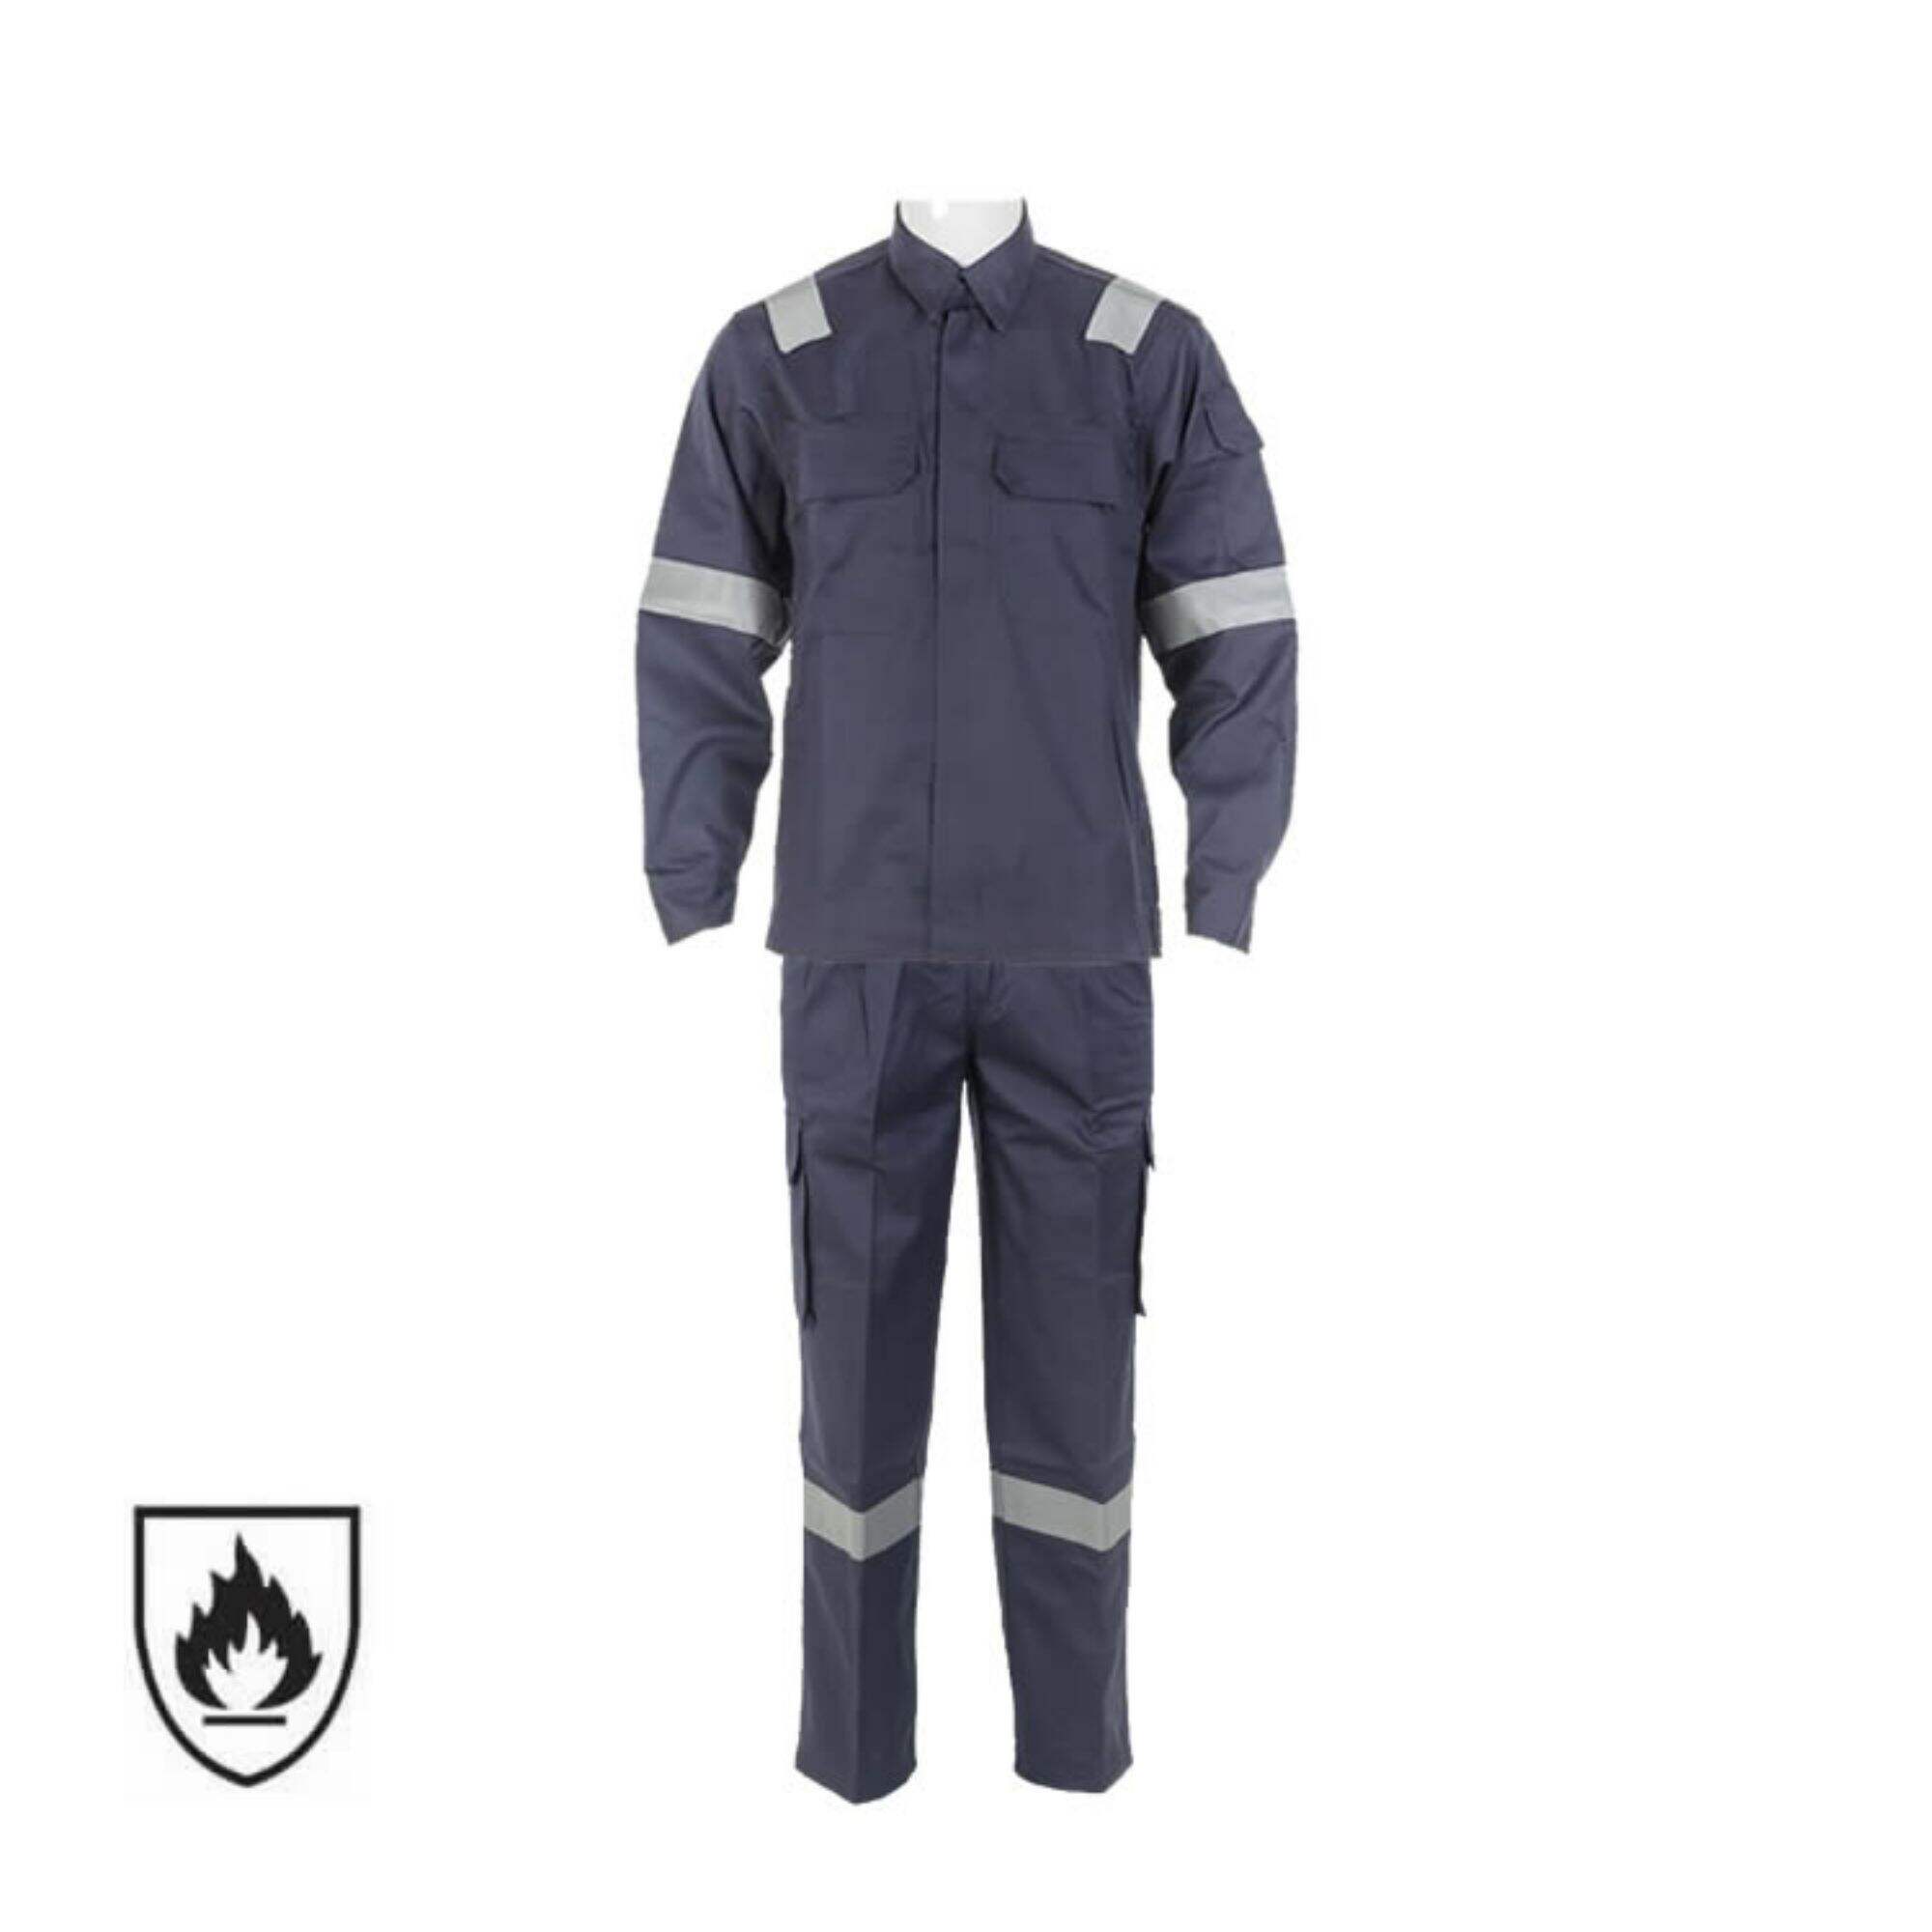 Fashionable Design Obvious Reflective Hi Vis Work Clothes Safety Construction Antistatic Suits